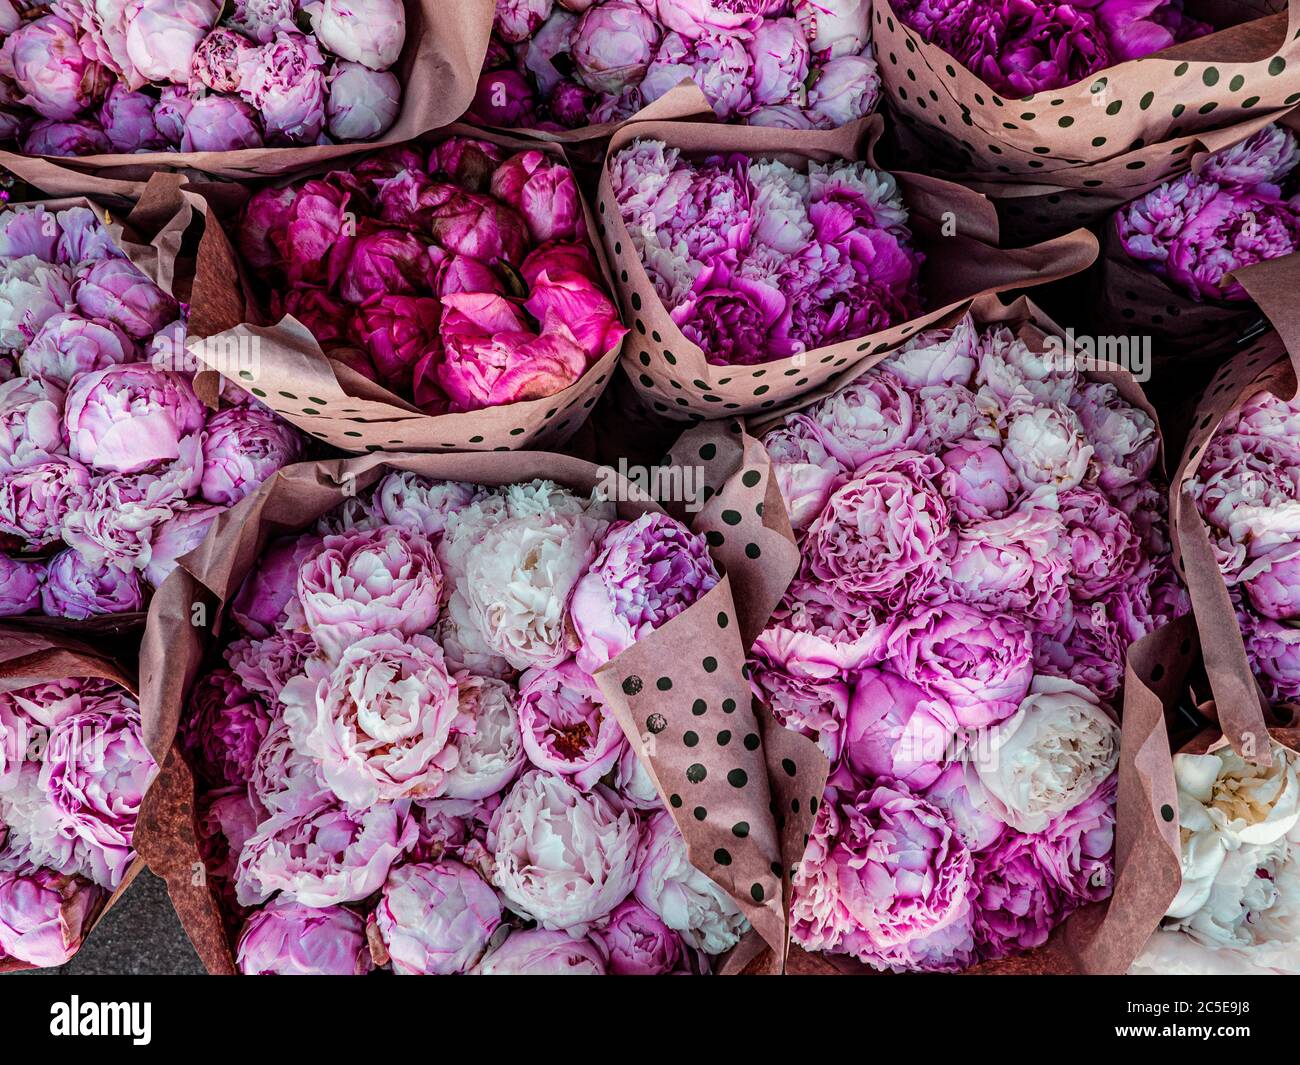 Bouquets of pink and white peonies. Bouquets of peony flowers on the farmers market. Stock Photo